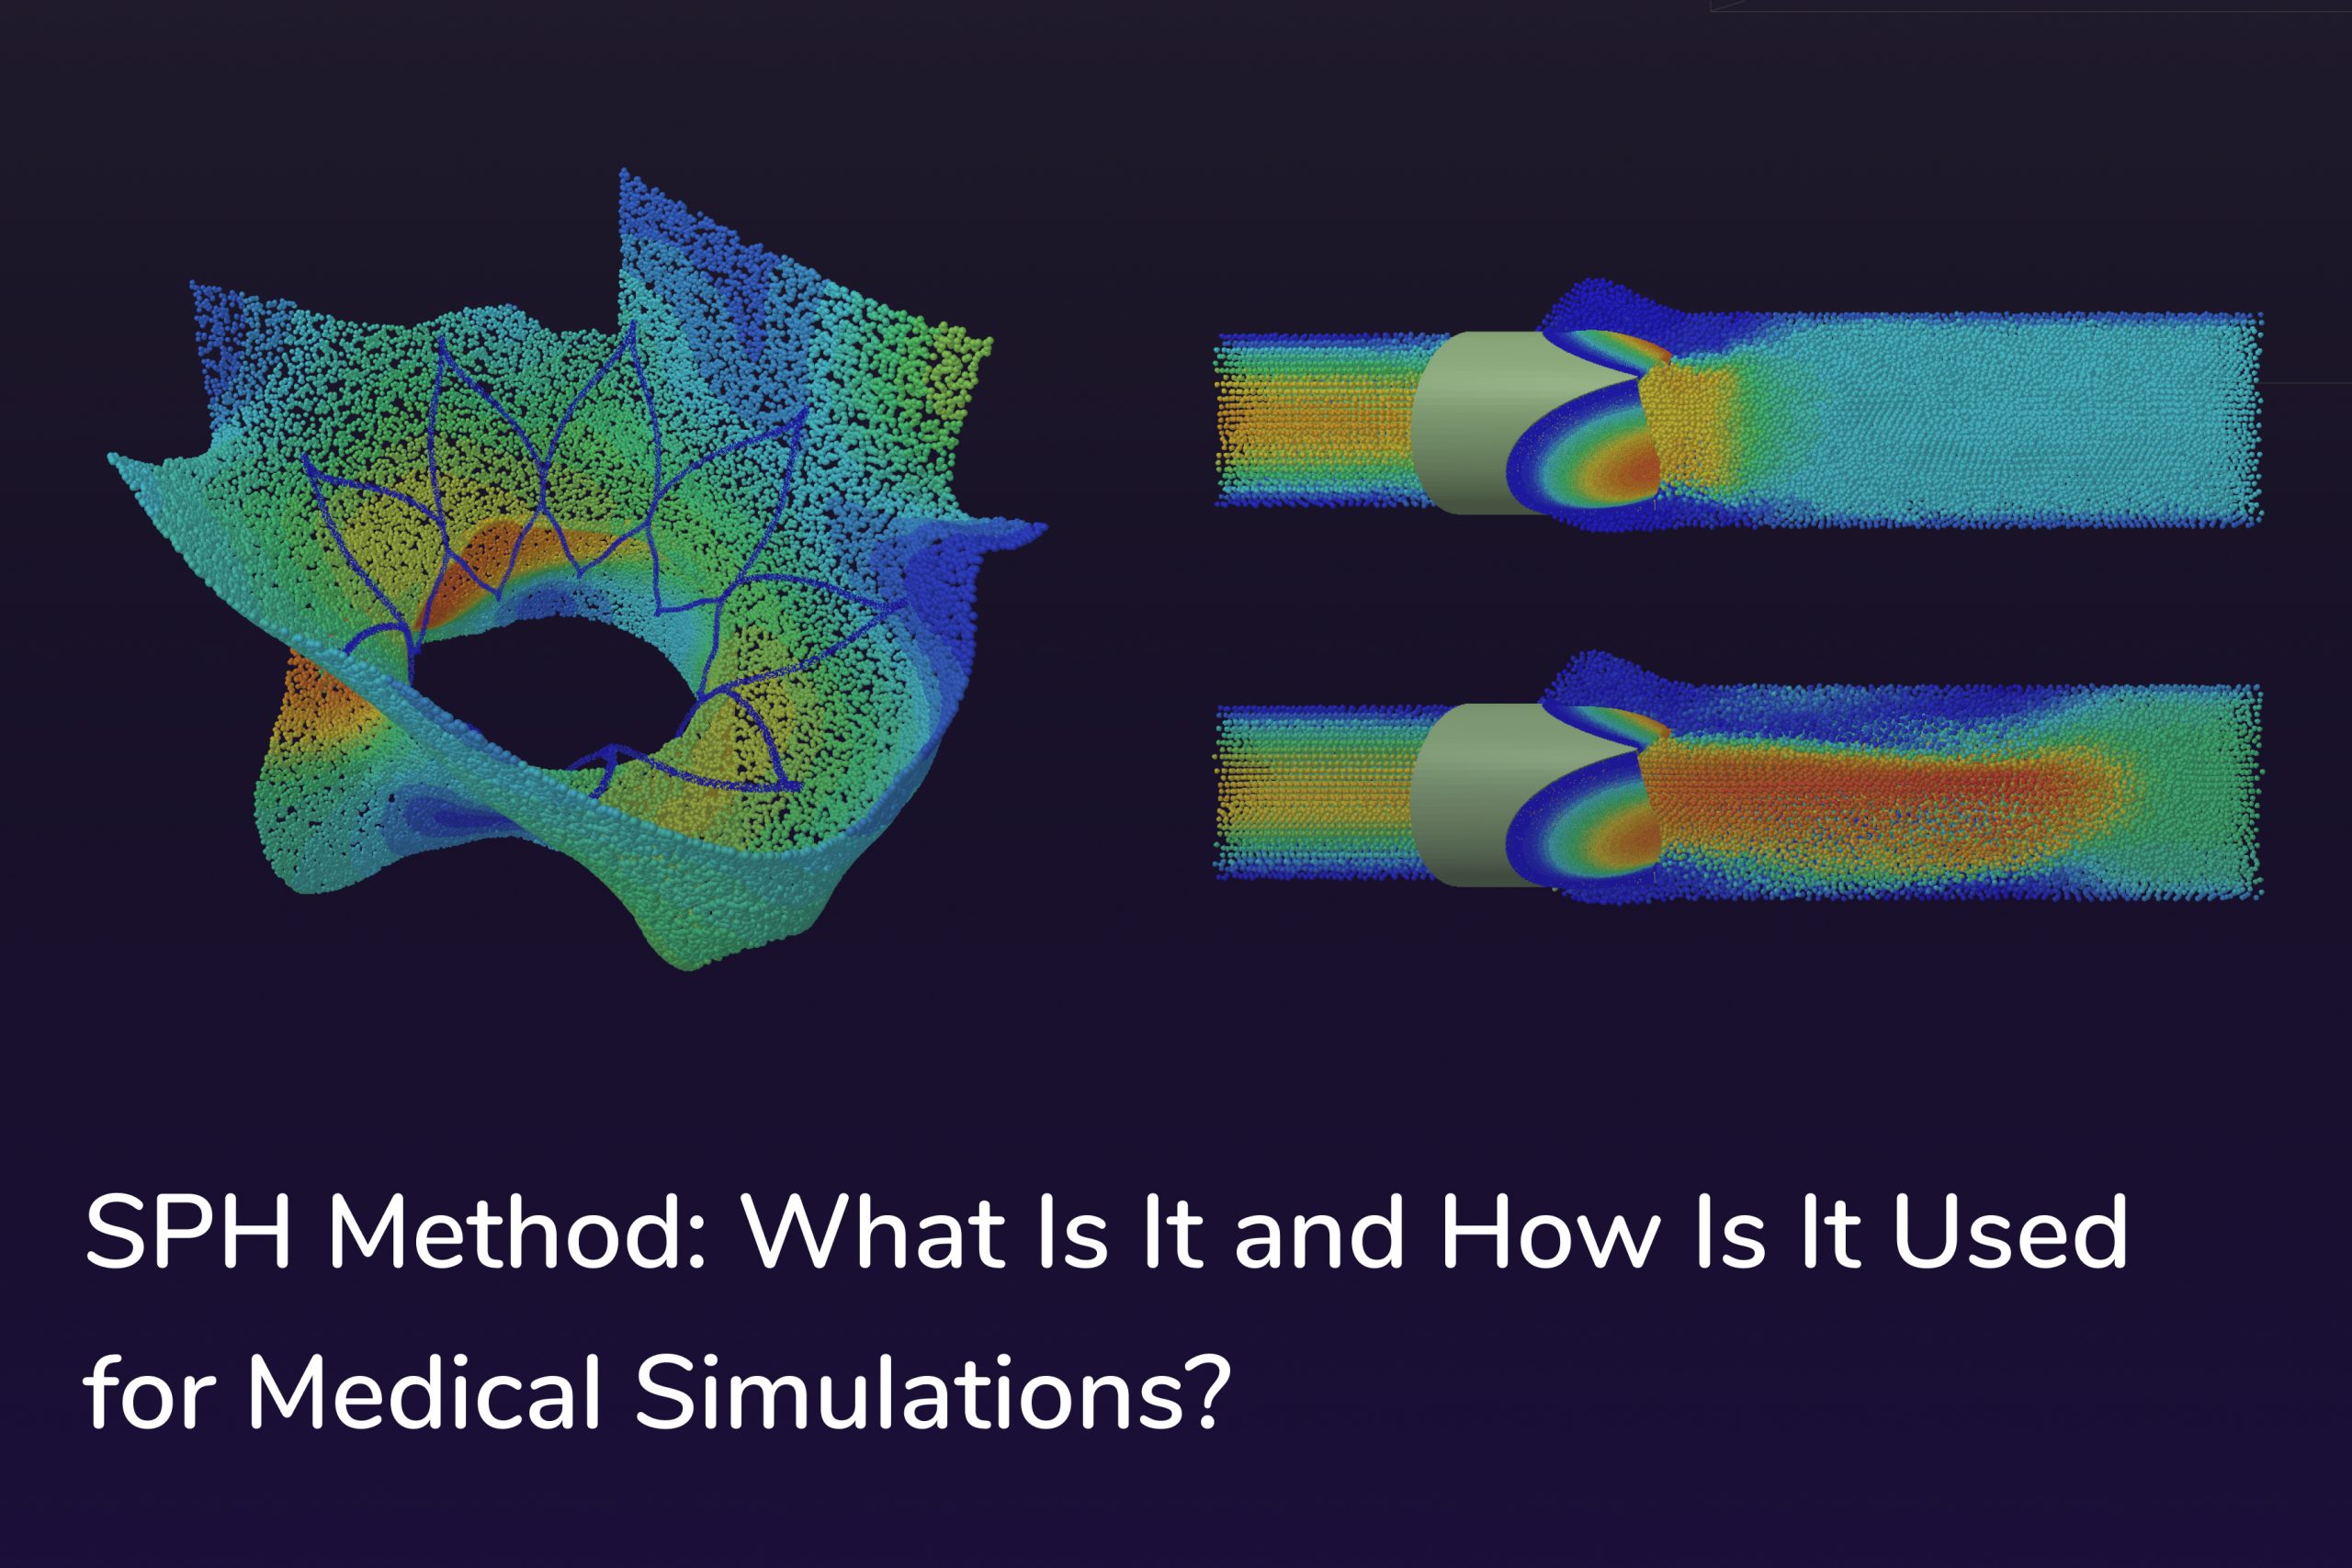 SPH method: What is it and how is it used for medical simulations?